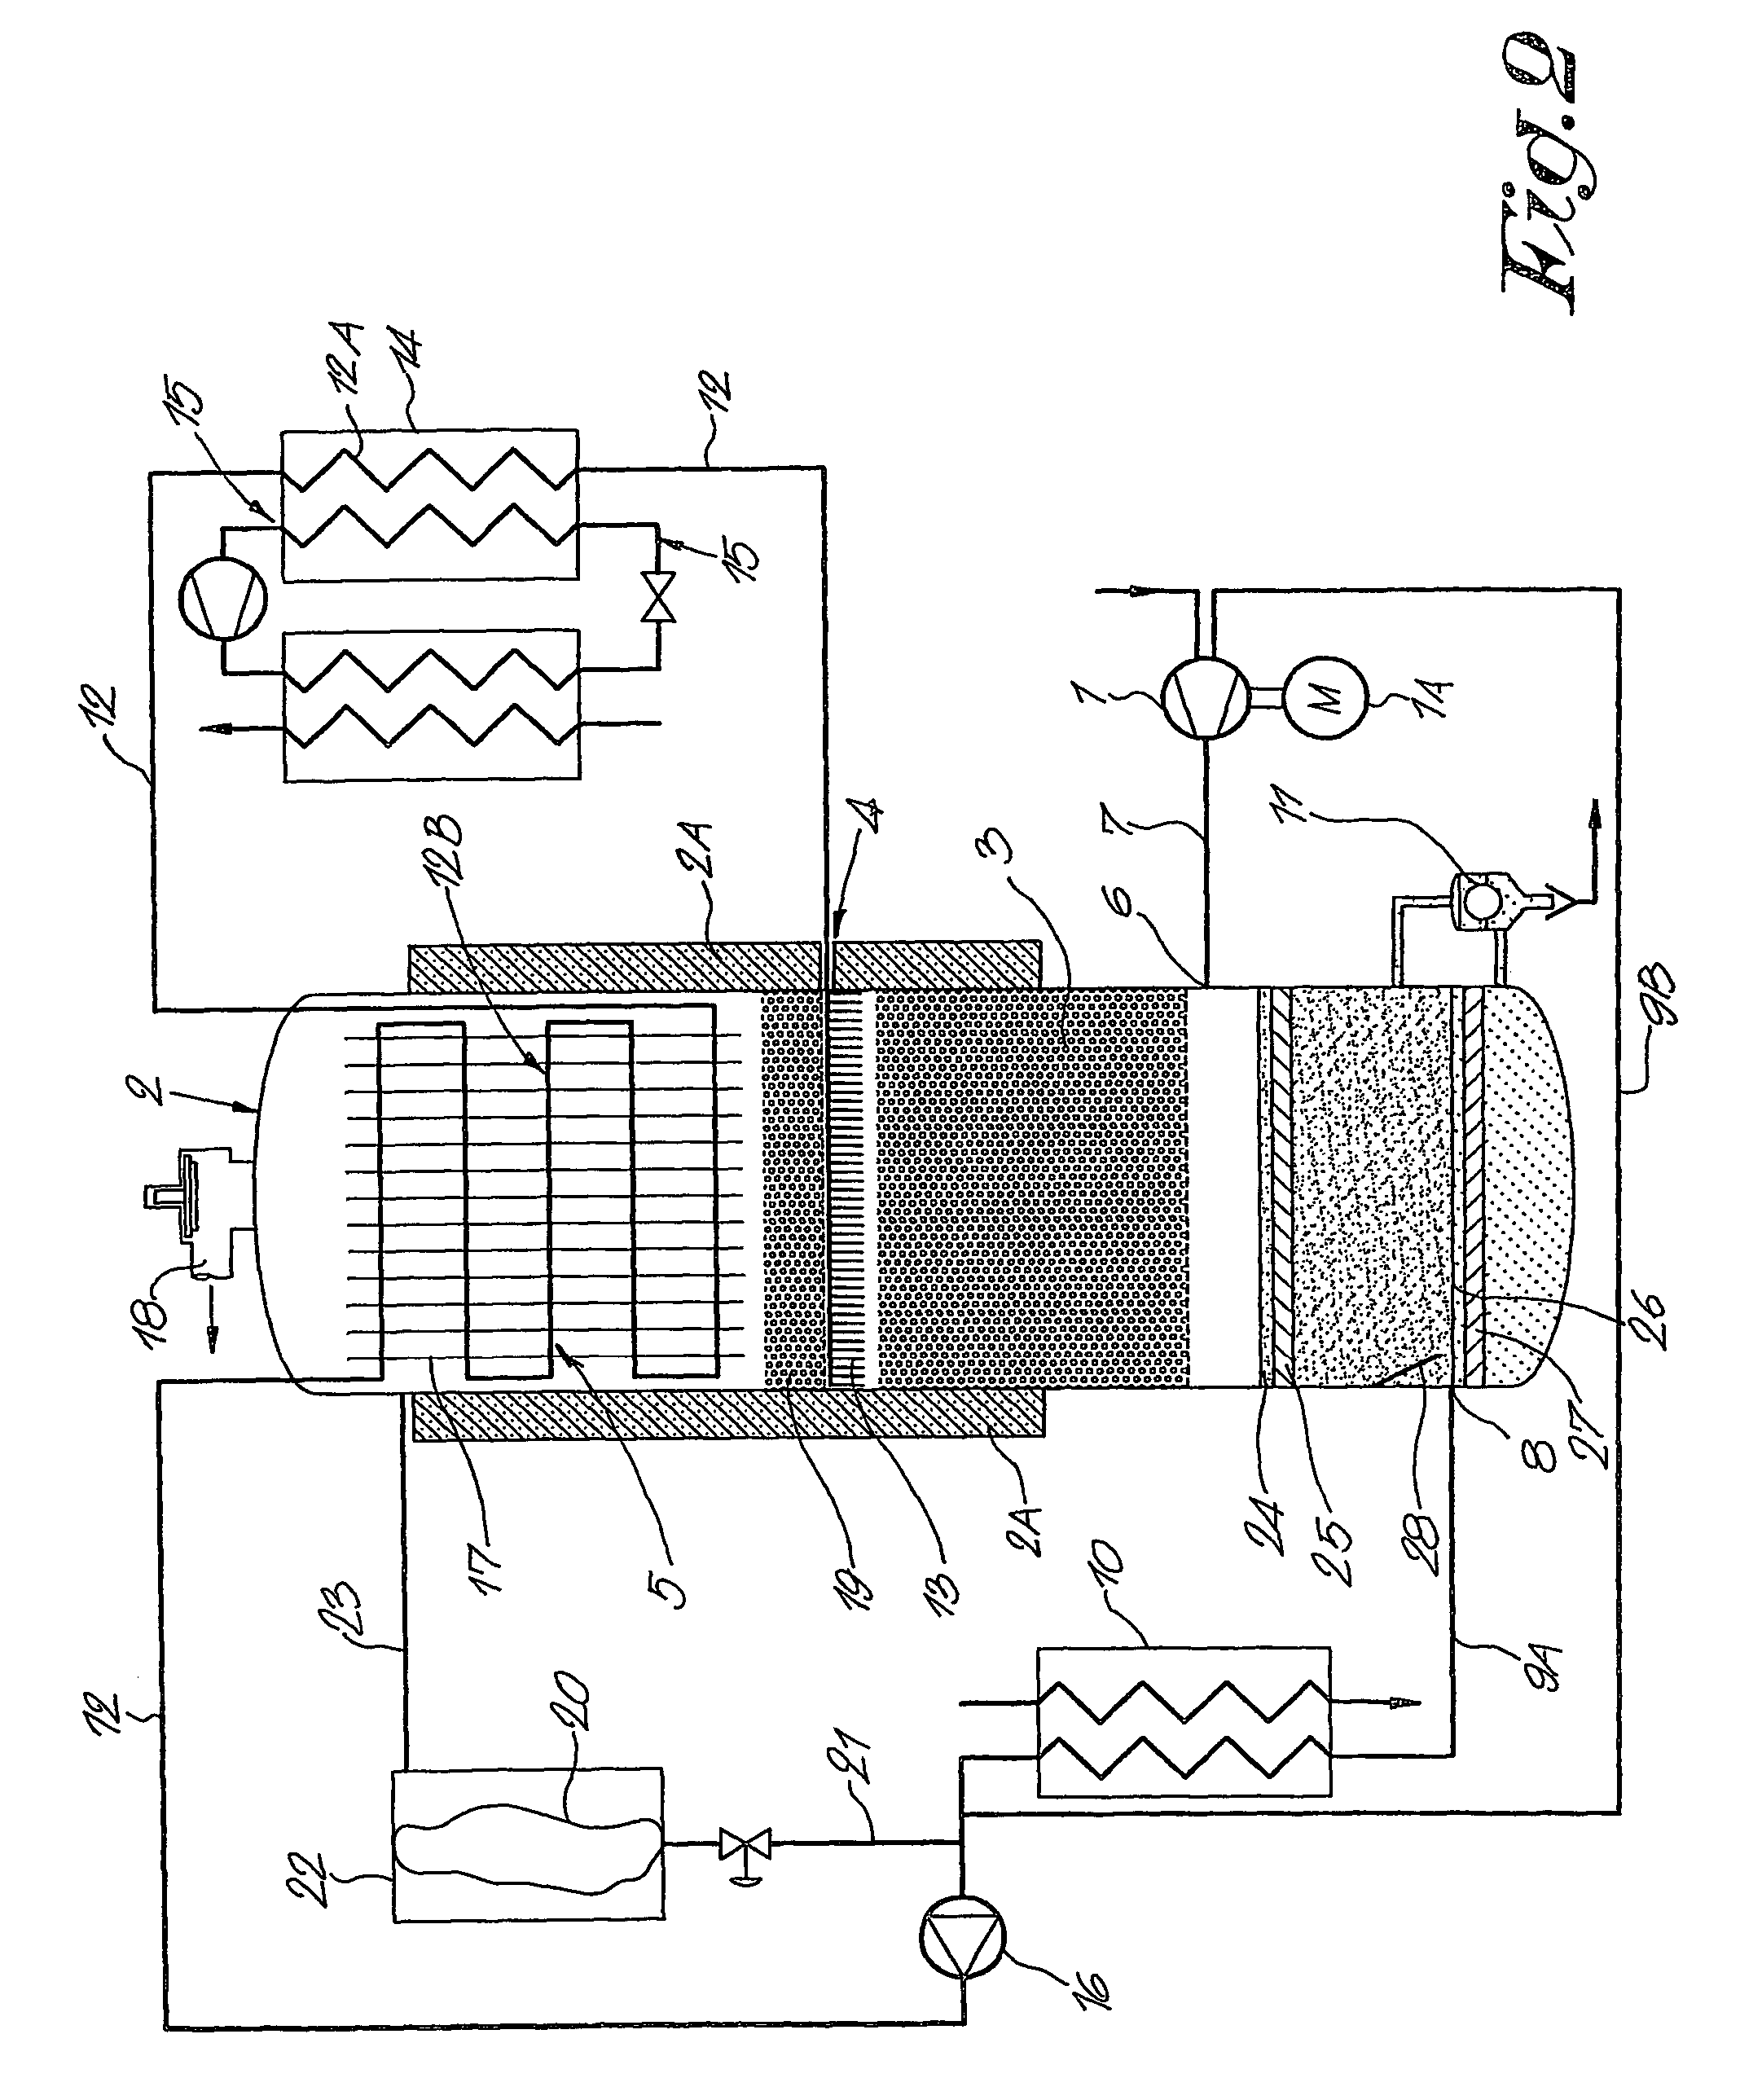 Device for simultaneously cooling and removing liquid from a gas from a compressor